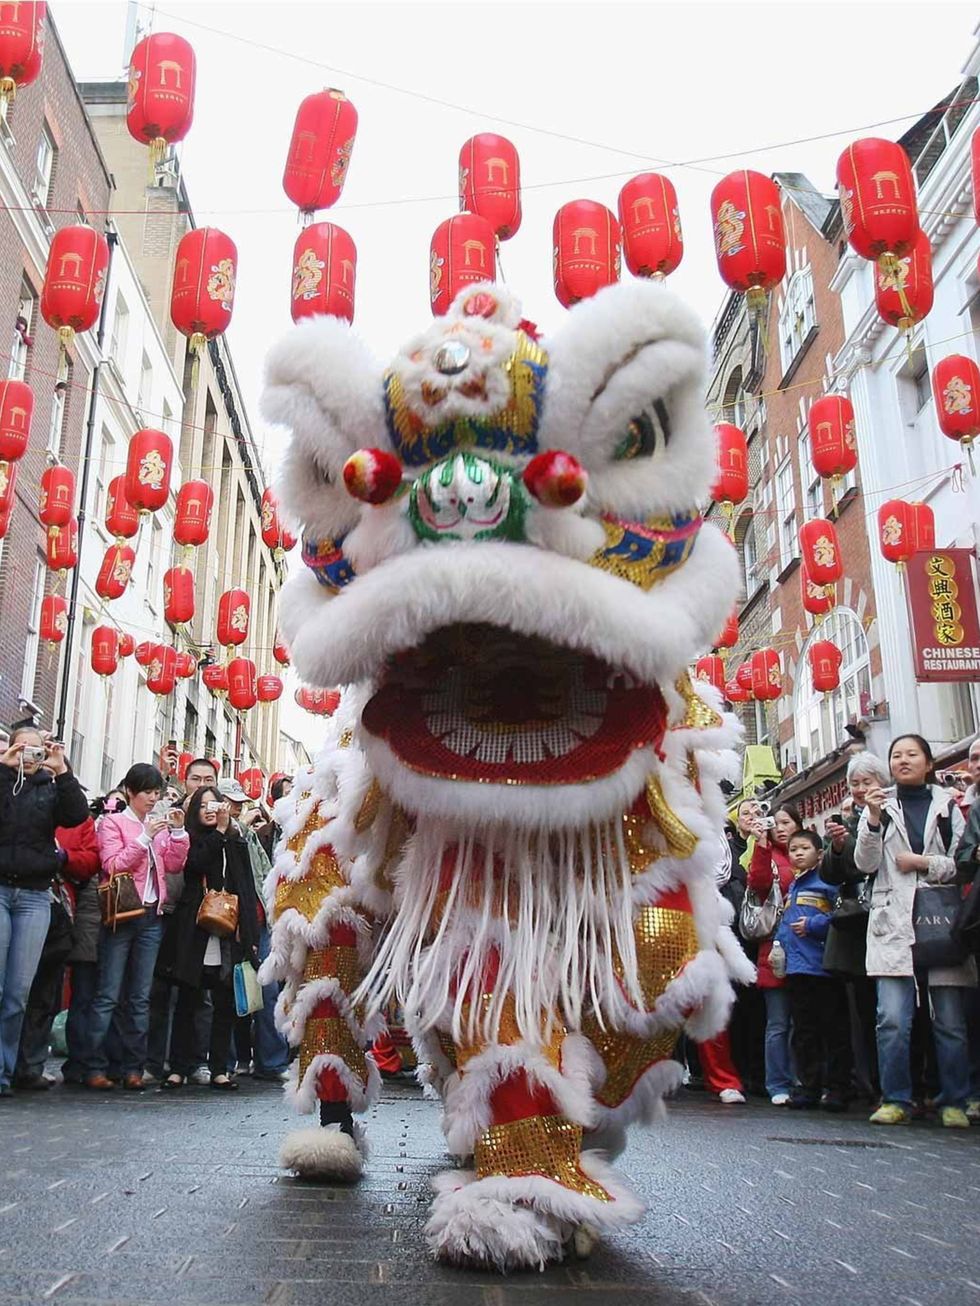 &lt;p&gt;&lt;strong&gt;Culture: Chinese New Year celebrations&lt;/strong&gt;&lt;/p&gt;&lt;p&gt;Today marks a new year in Chinese culture, and so we&rsquo;re extremely excited to hear that the people behind W1&rsquo;s Chinatown have organised a handful of 